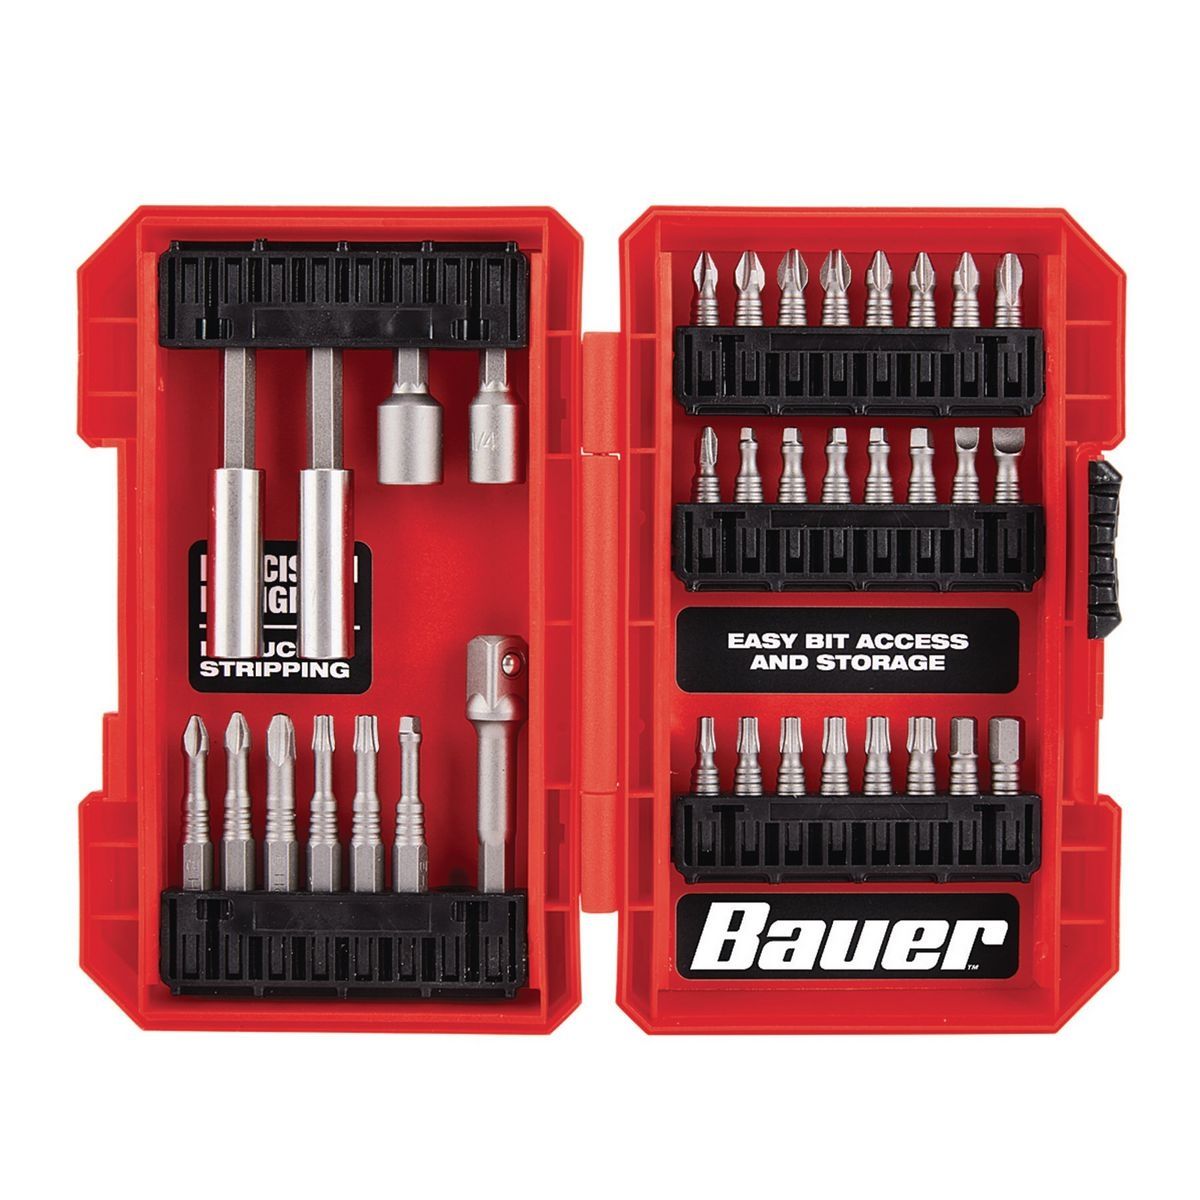 BAUER Impact Drill and Driver Bit Set, 35 Piece